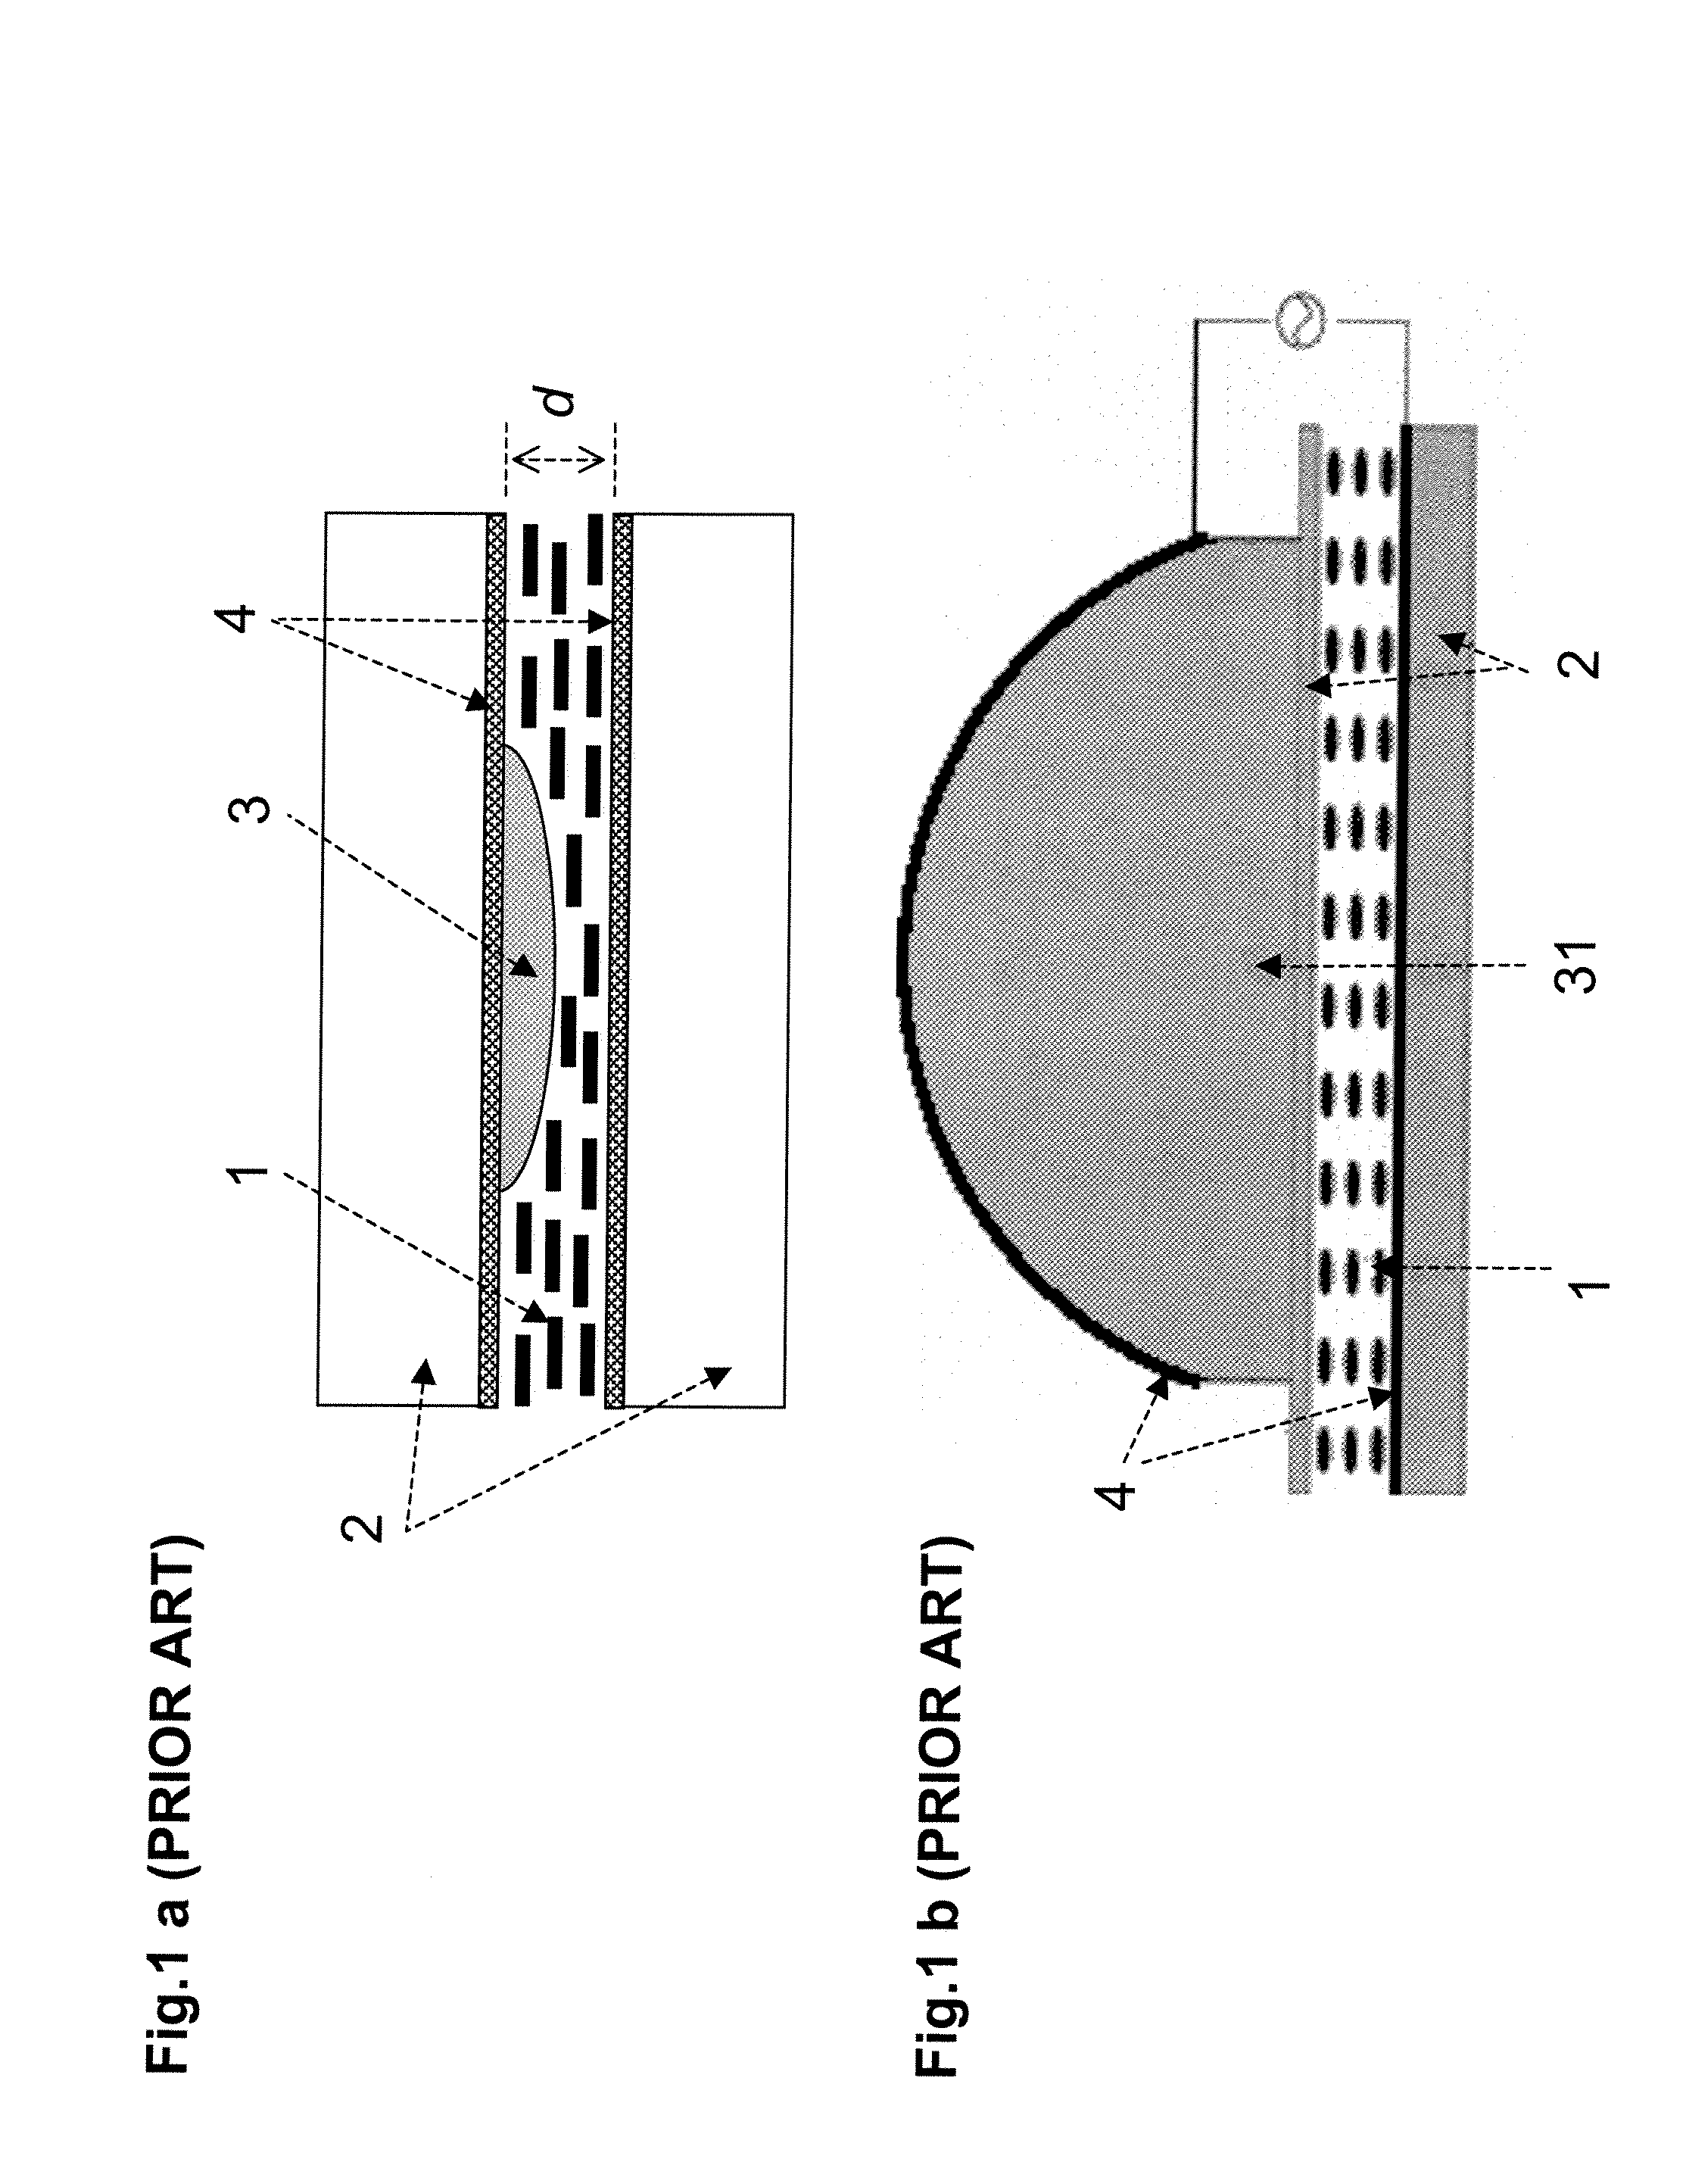 Method and apparatus for spatially modulated electric field generation and electro-optical tuning using liquid crystals